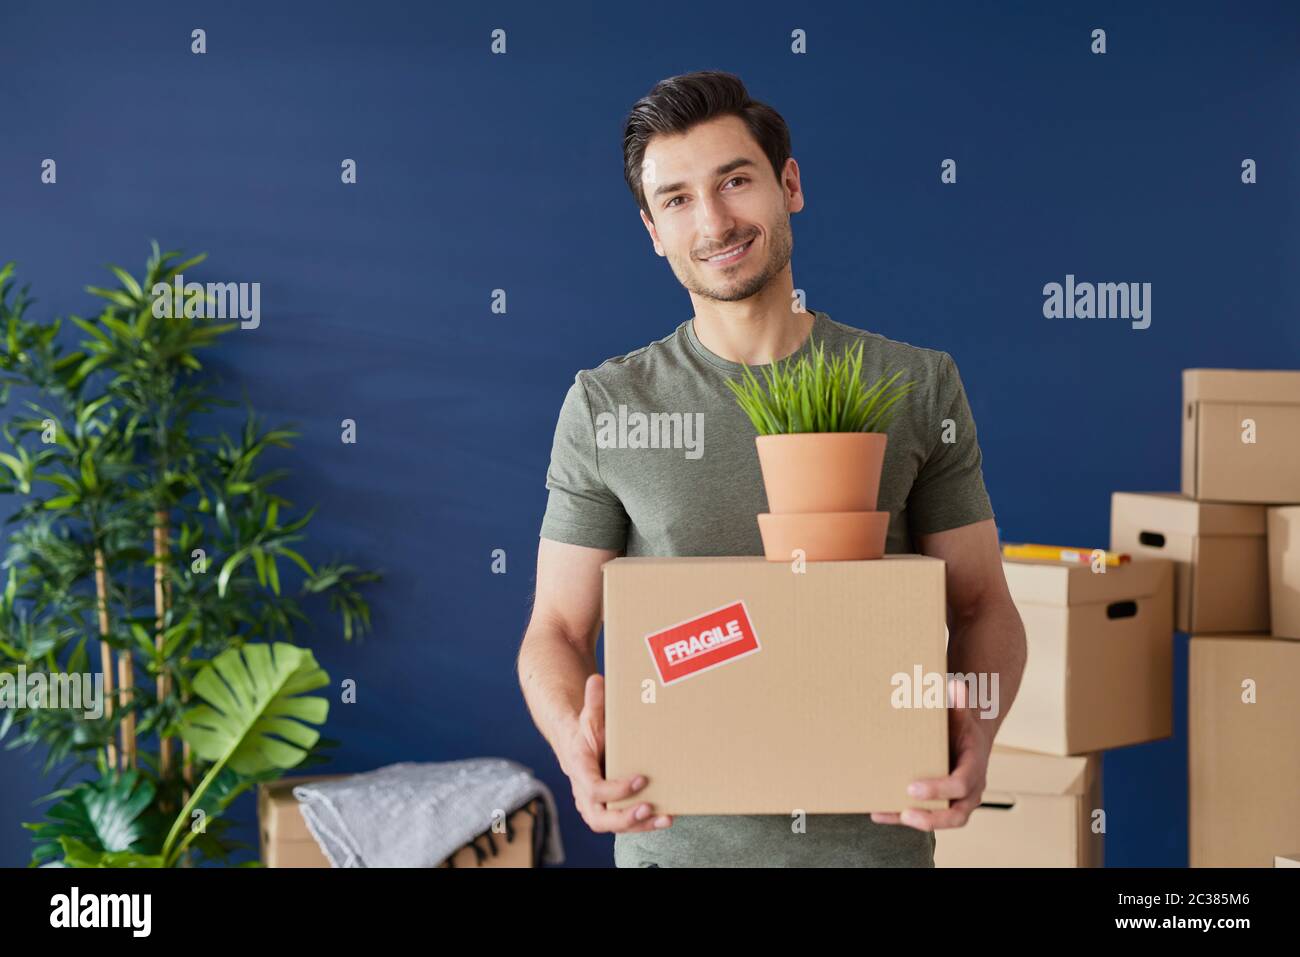 Portrait of young man with a cardboard box Stock Photo